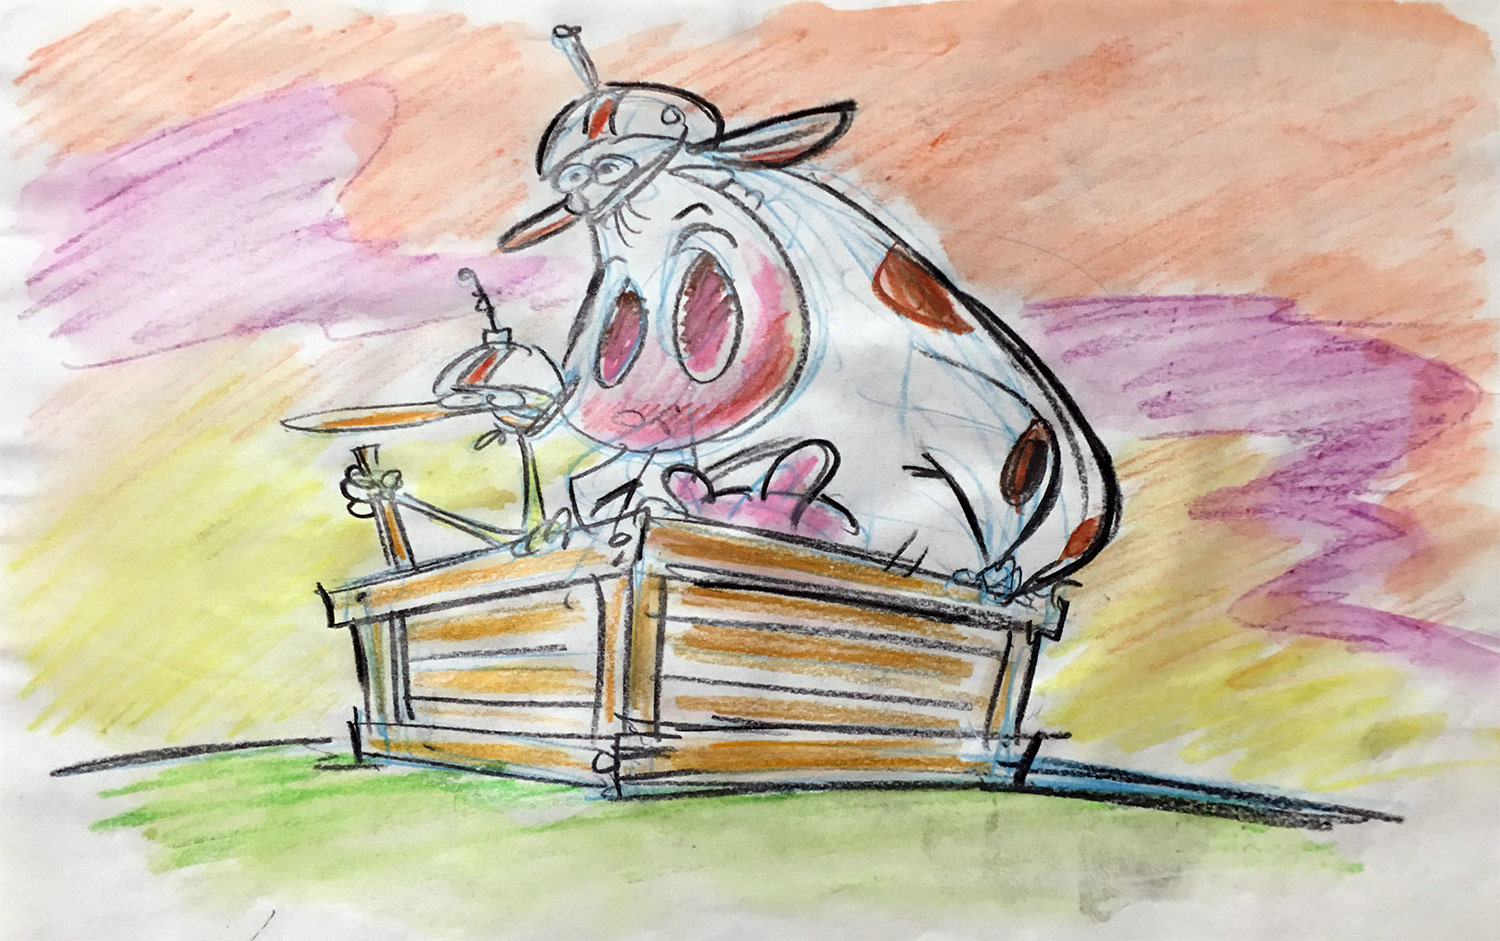 Early Cow and Chicken development sketch.